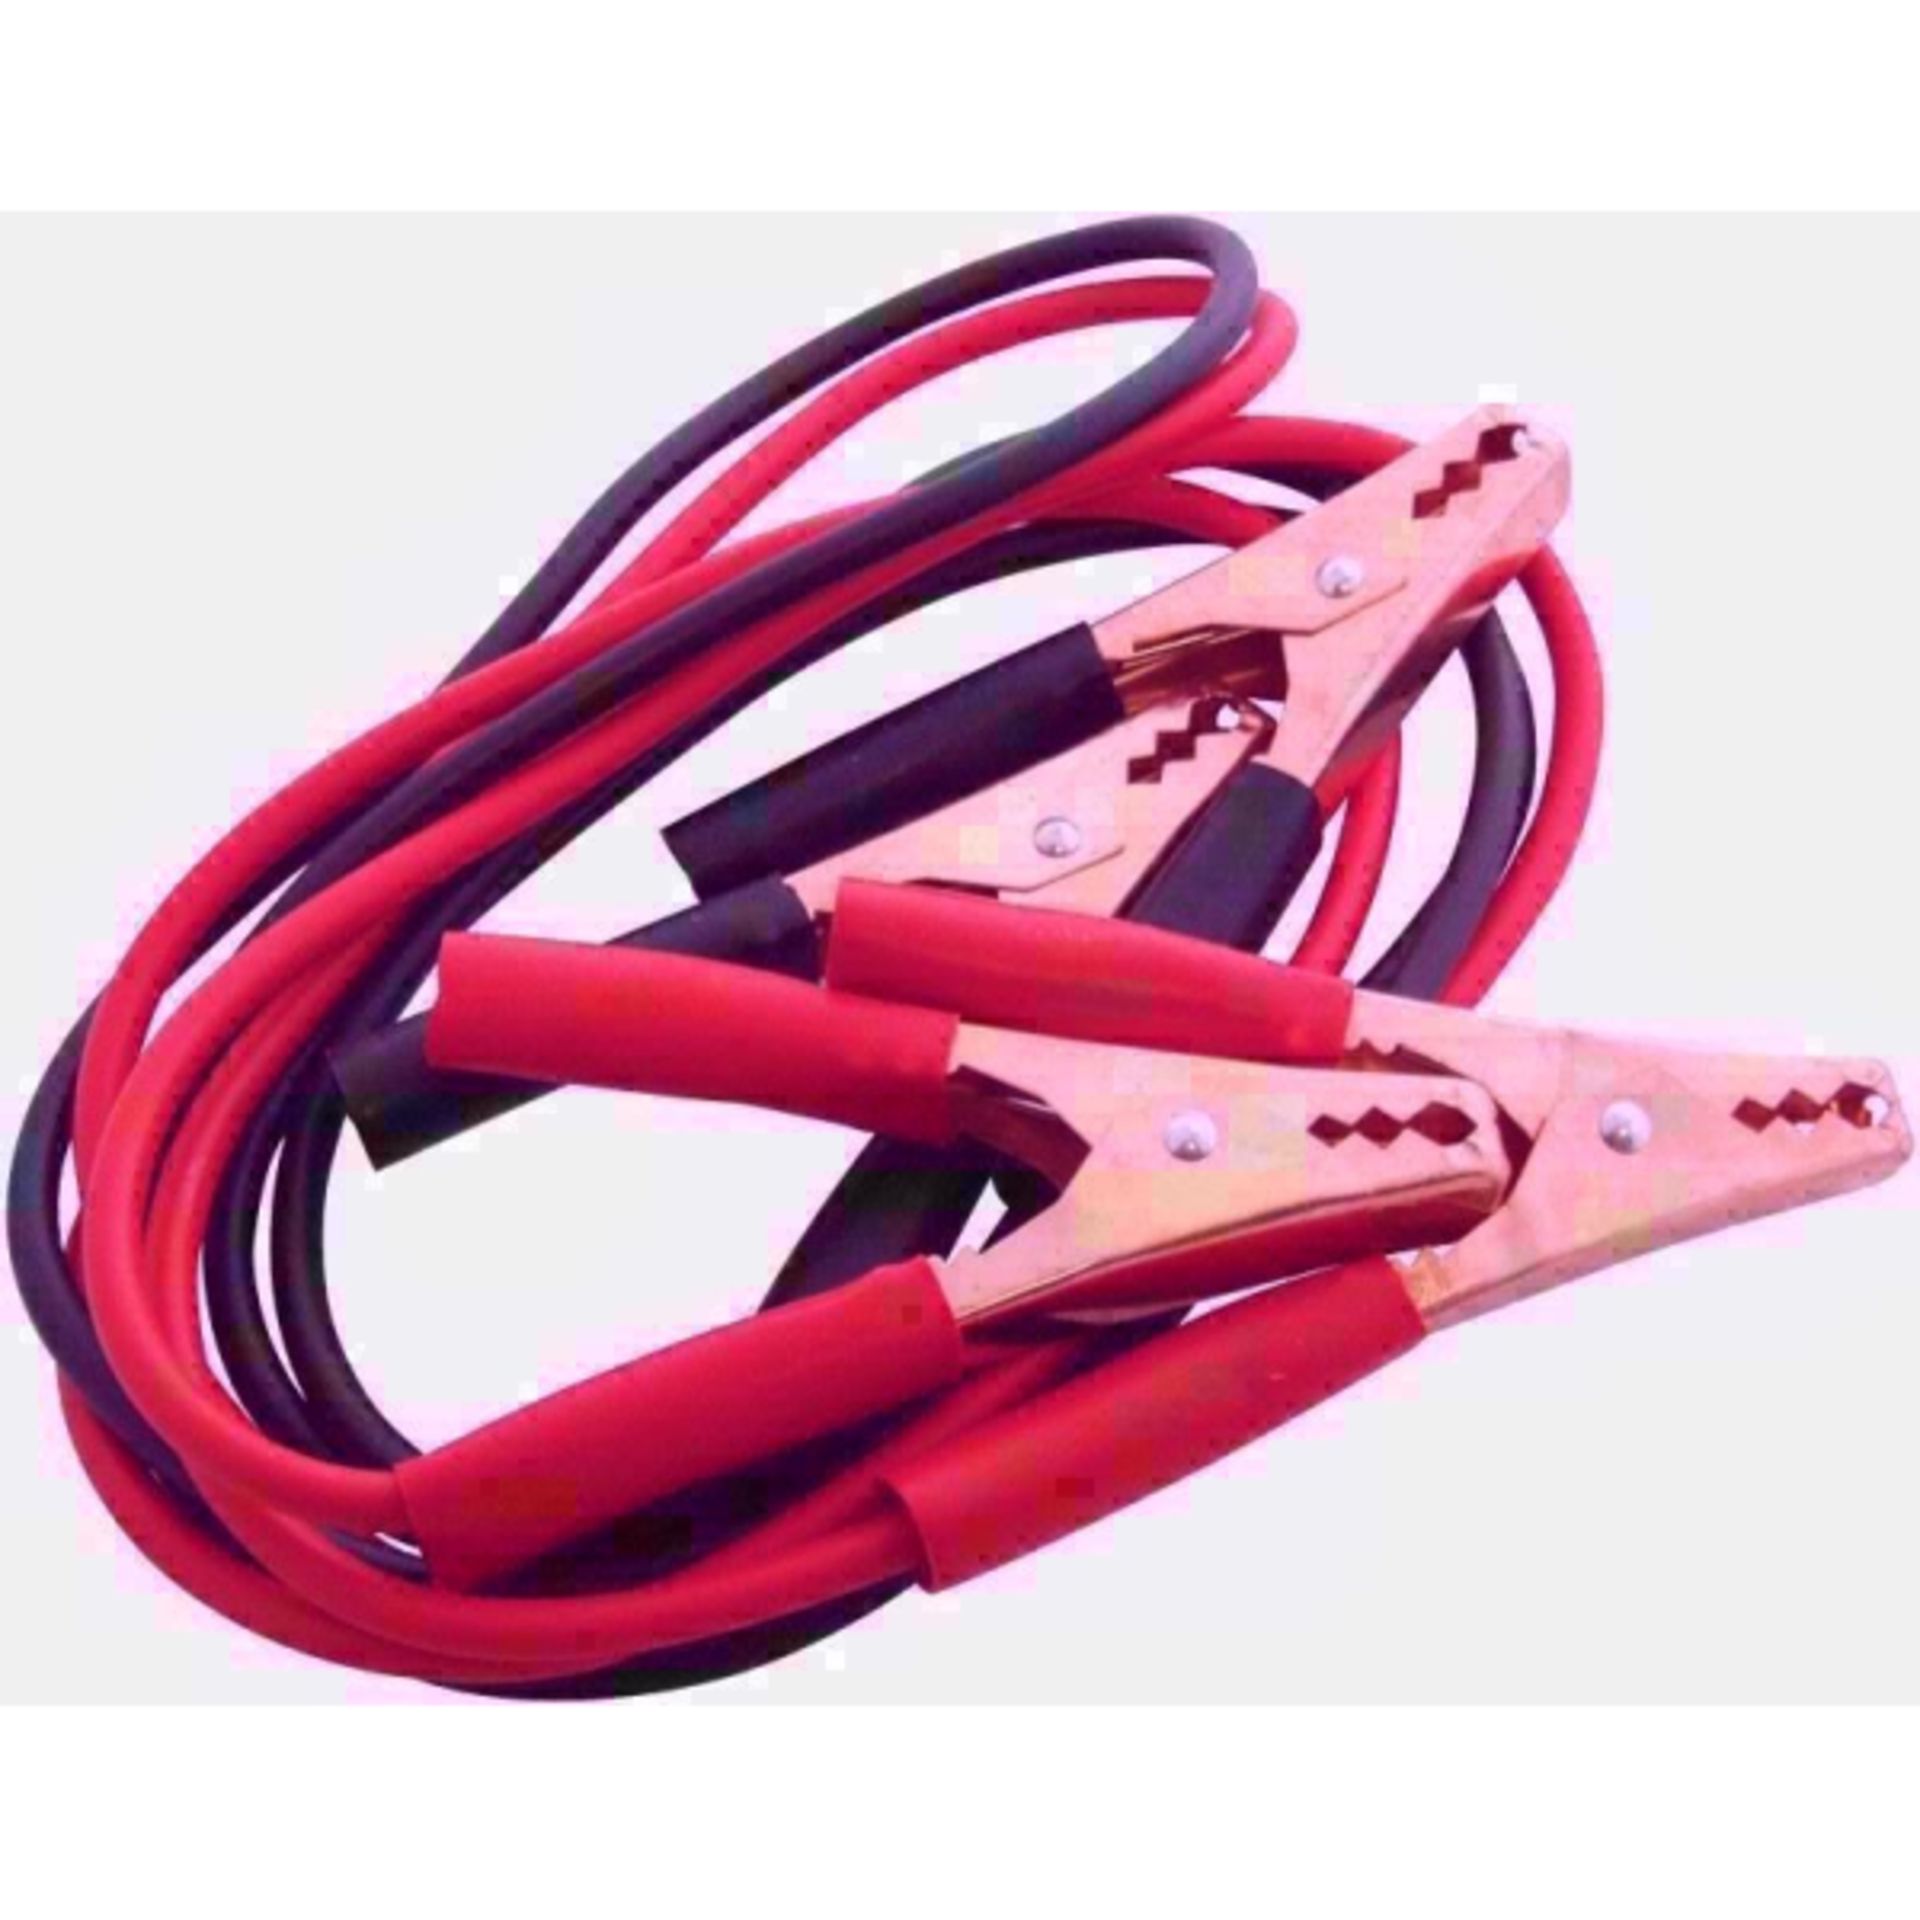 V *TRADE QTY* Brand New 800amp Booster Cable Jump Leads X 4 YOUR BID PRICE TO BE MULTIPLIED BY FOUR